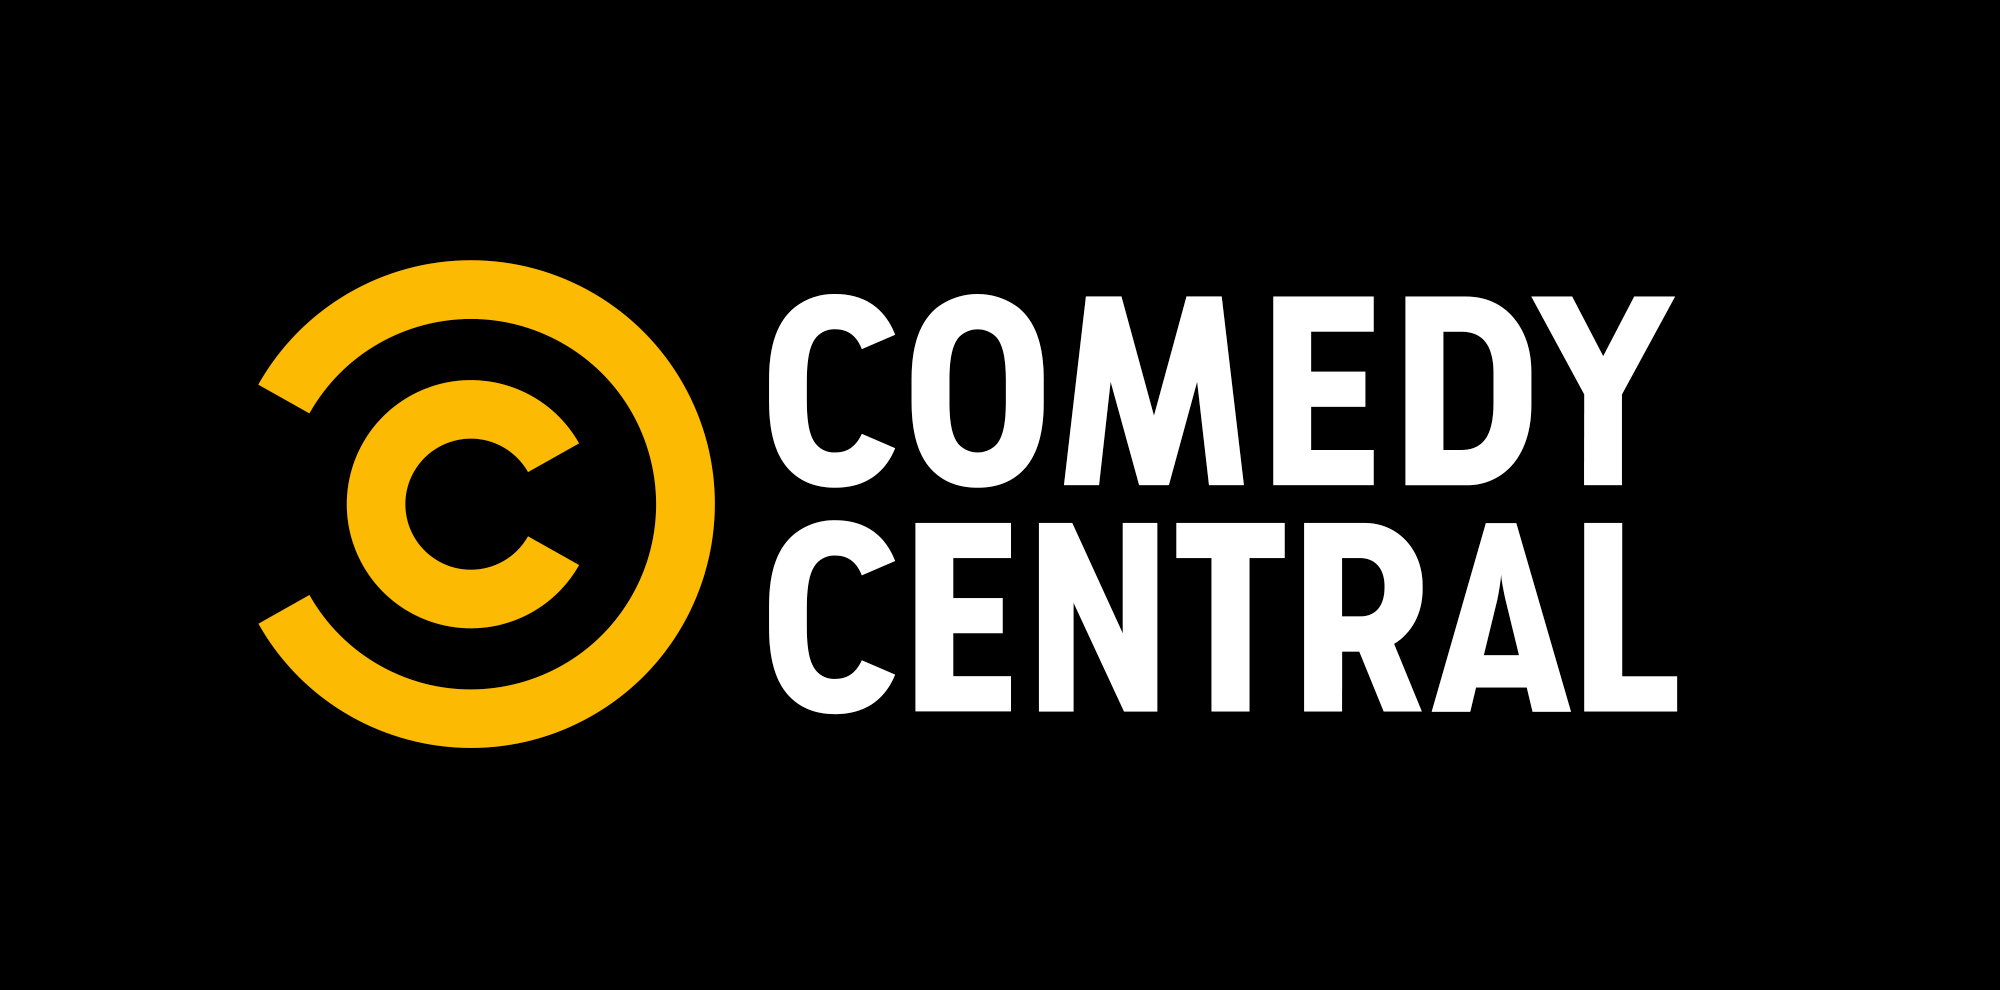 Comedy Central Logo - Brand New: New Logo And On Air Look For Comedy Central